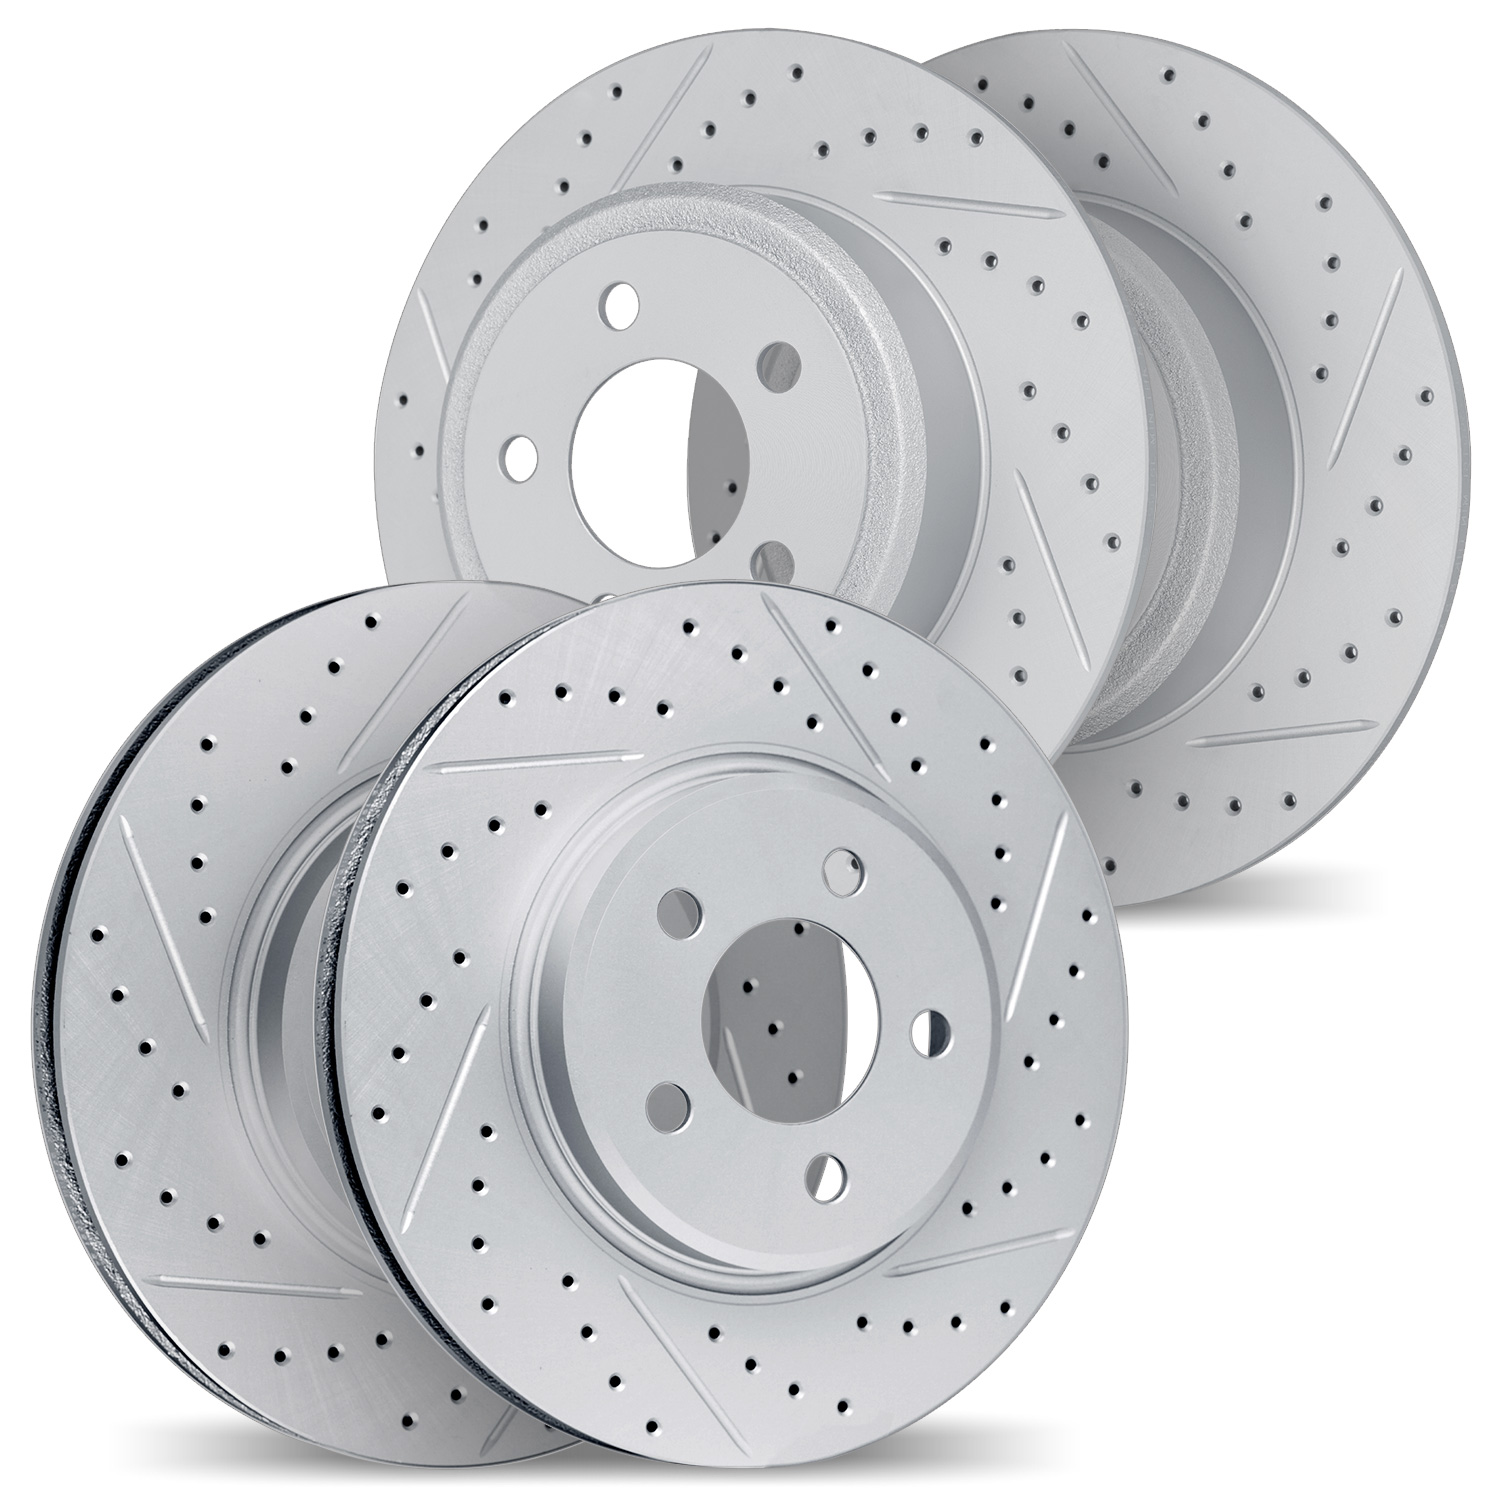 2004-54076 Geoperformance Drilled/Slotted Brake Rotors, Fits Select Ford/Lincoln/Mercury/Mazda, Position: Front and Rear